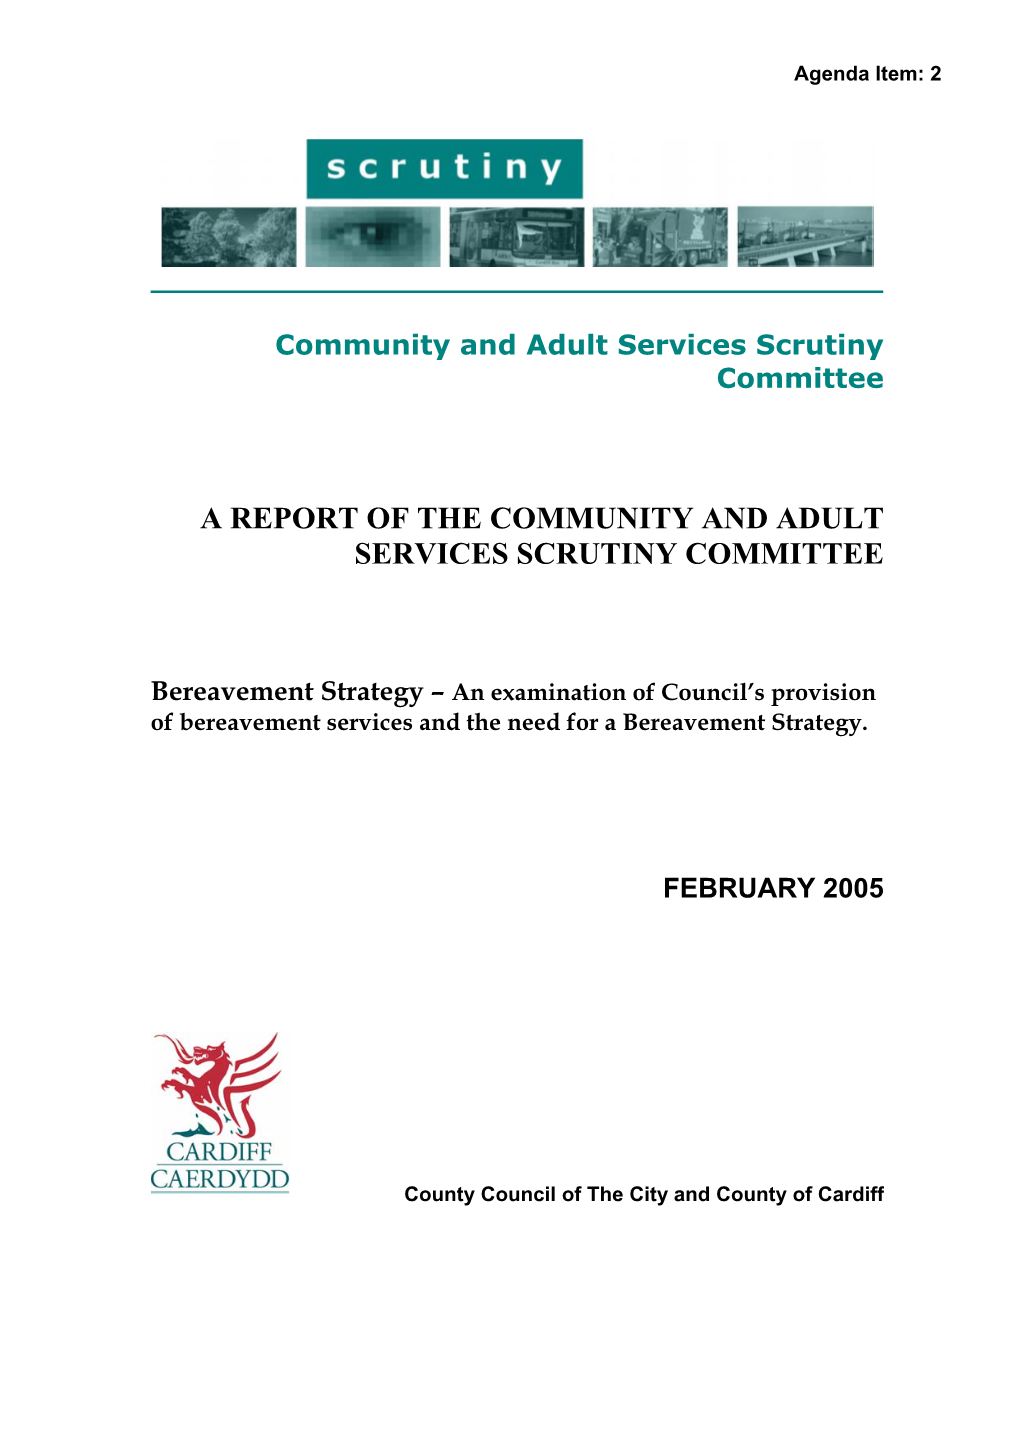 A Report of the Community and Adult Services Scrutiny Committee